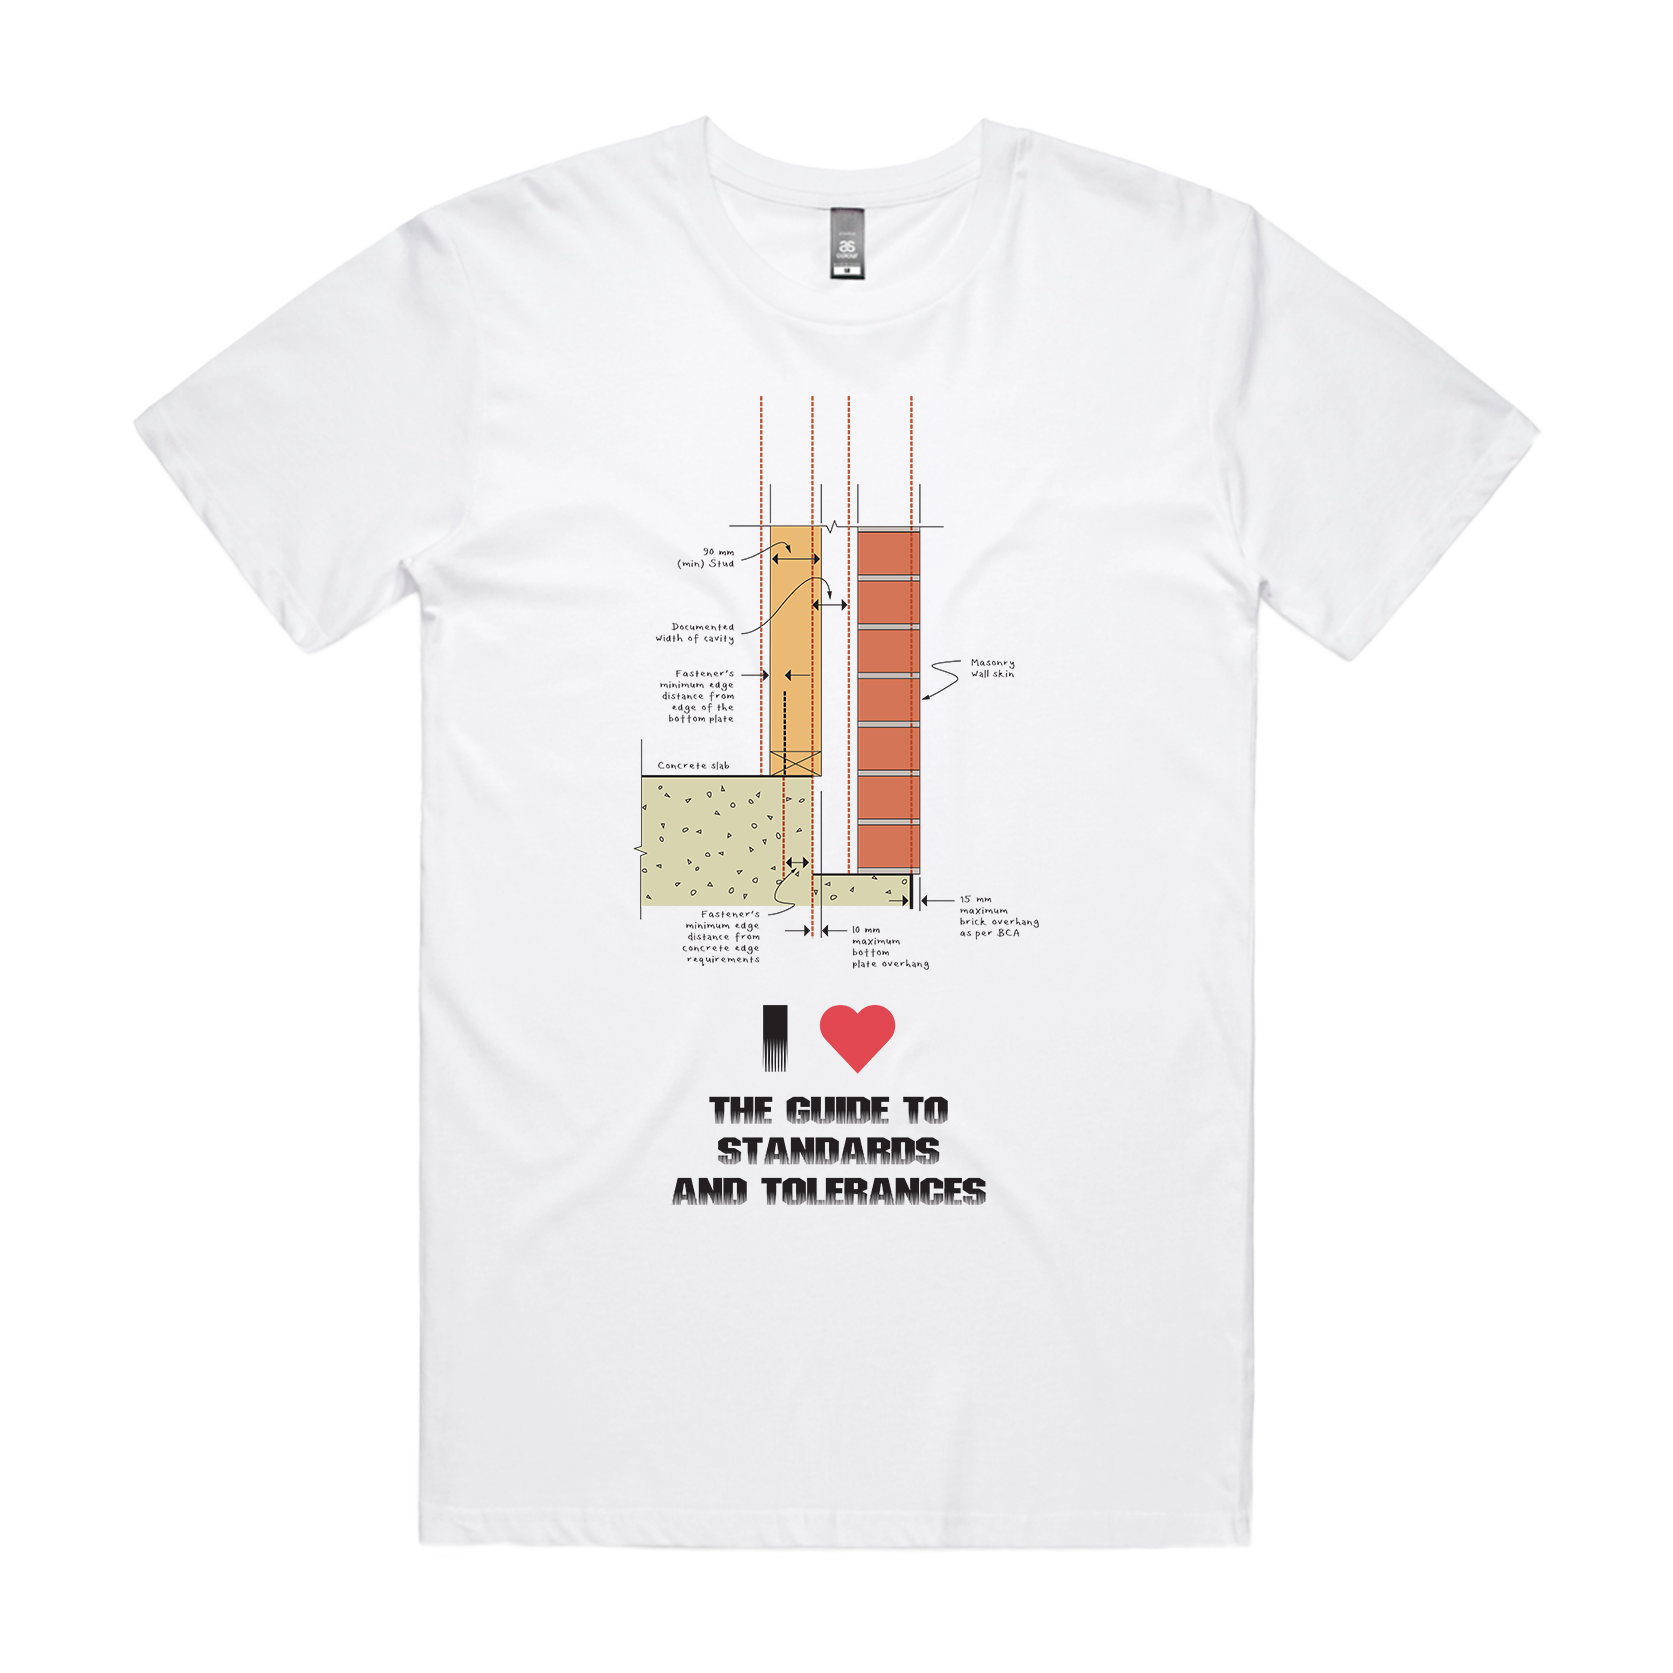 I love The Guide to Standards & Tolerances-4.08 T-Shirt - Site Inspections